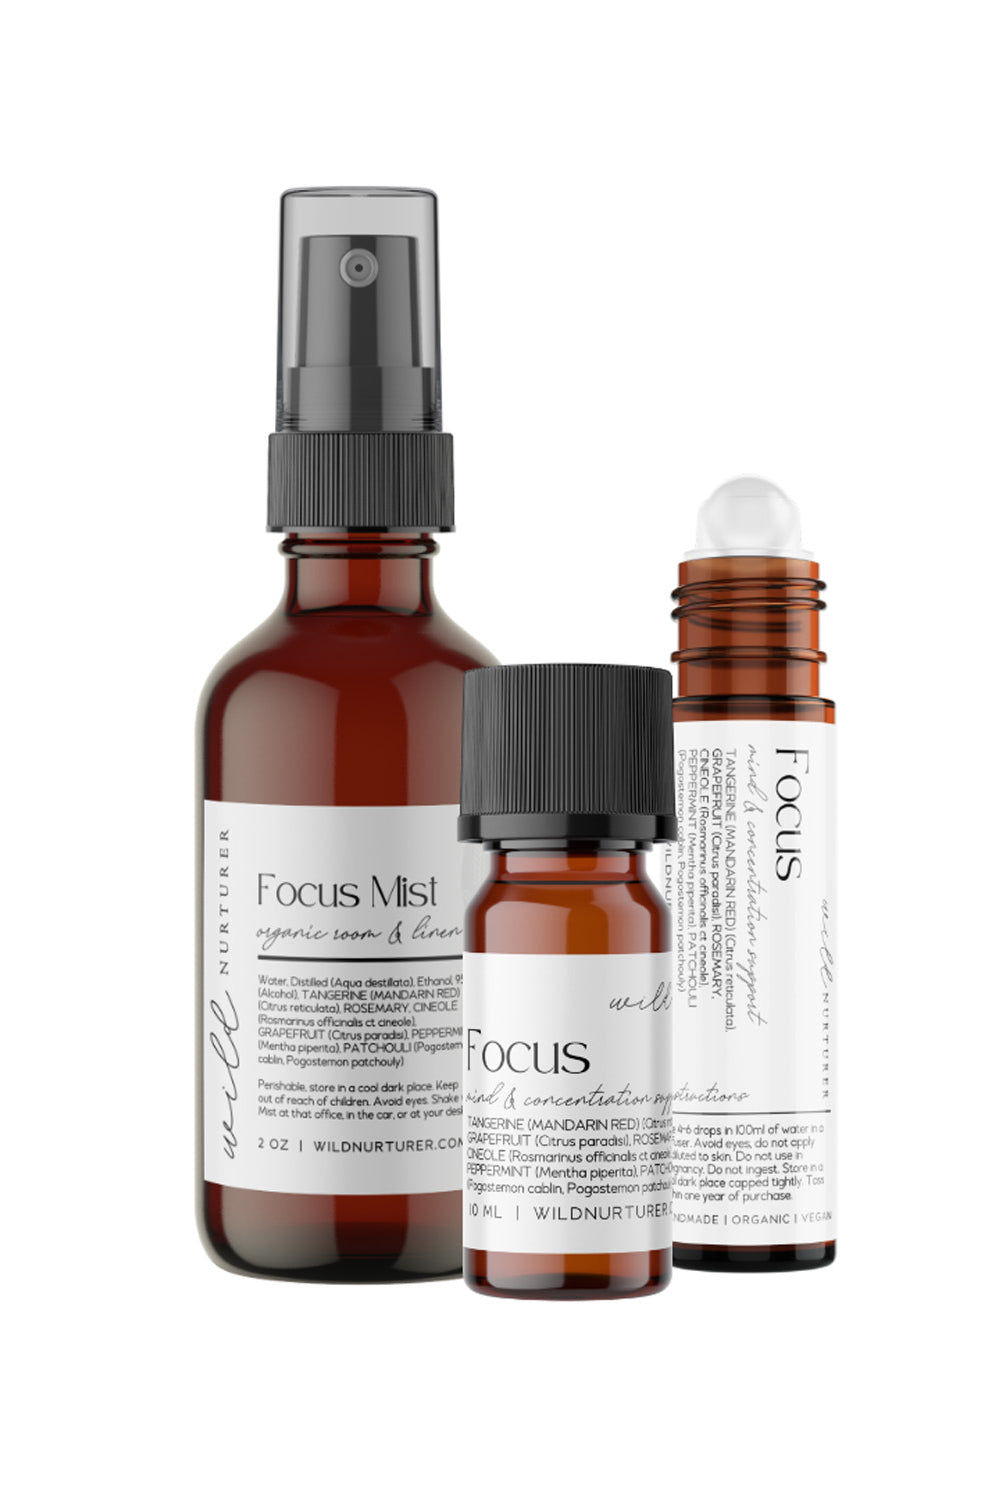 Two bottles of Wild Nurturer Aromatherapy's "Focus Blend" essential oil spray, one larger with a spray nozzle and one smaller with a dropper, both with white labels on a white background.